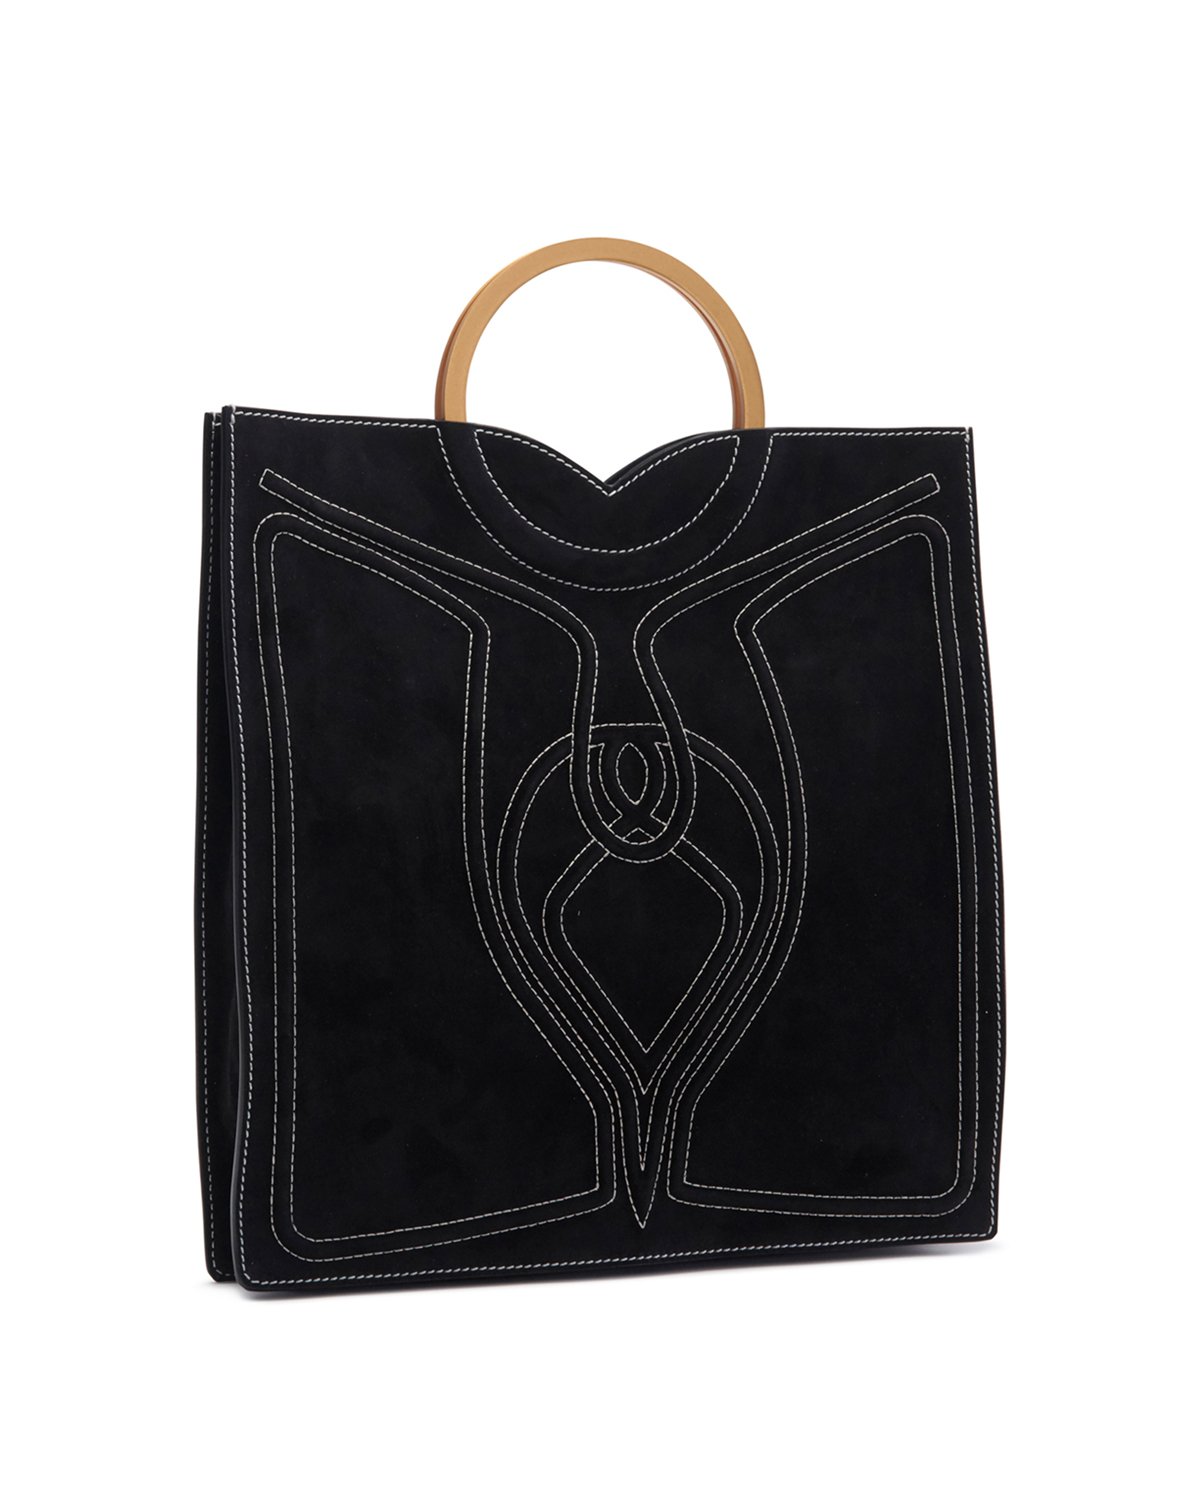 Medium black suede bag with embossed embroidery | Temporary Flash Sale | Genny